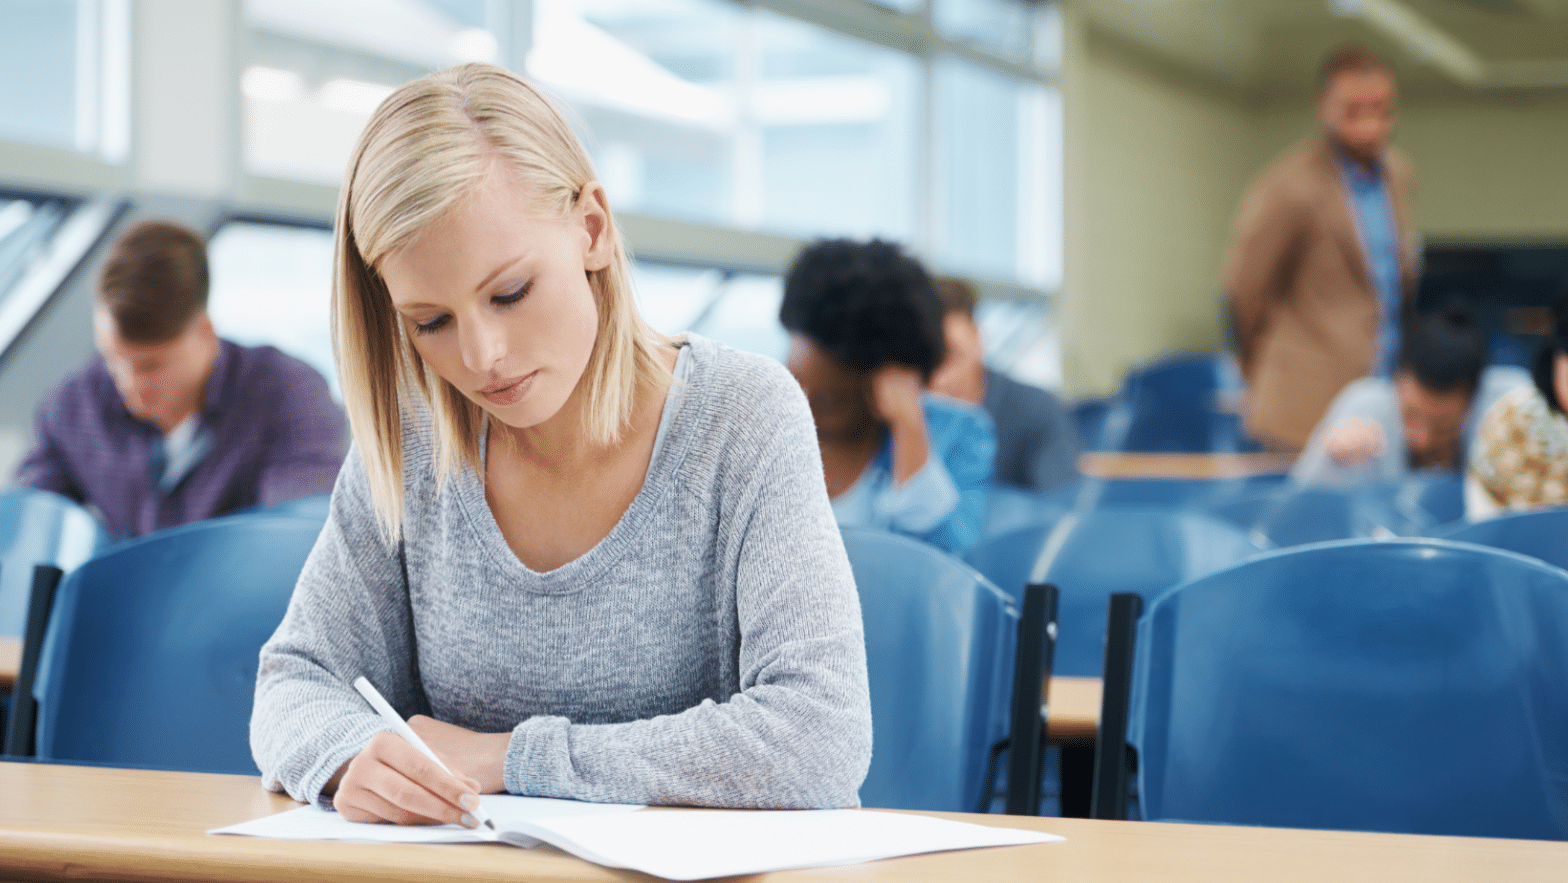 Make sure that your final exam grade doesn't negatively impact your transcripts with these 10 tips.